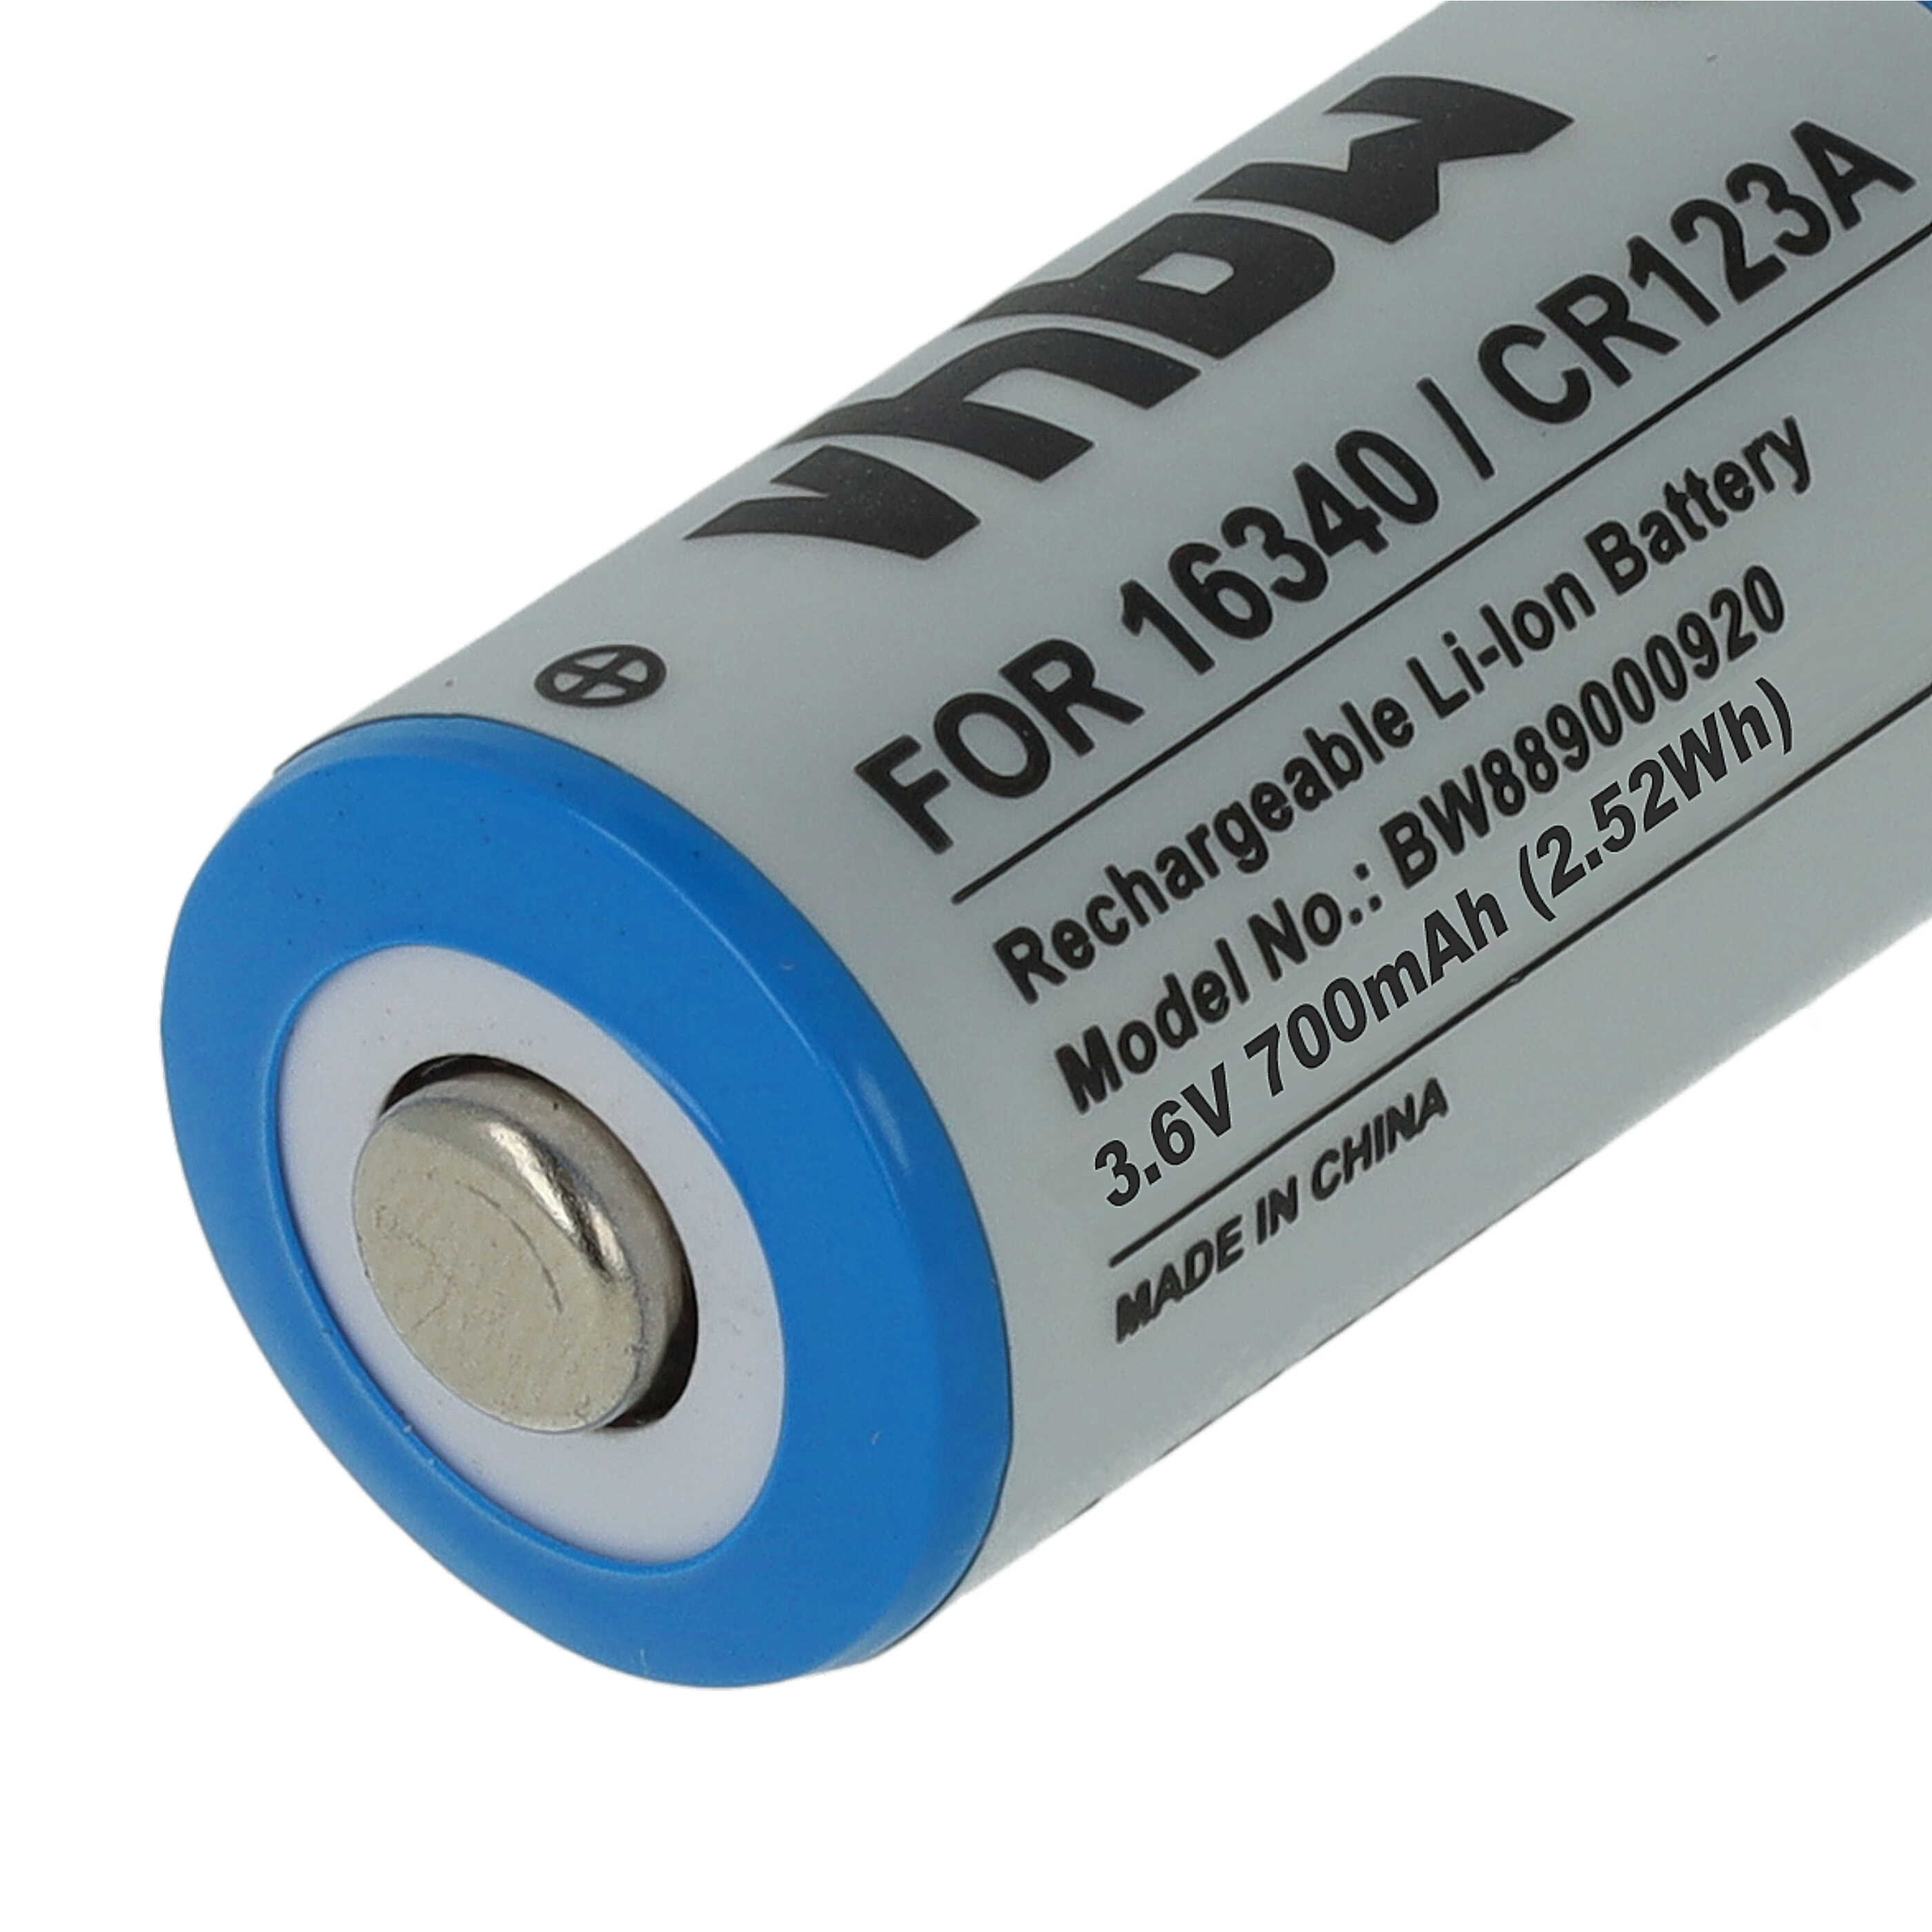 Battery (10 Units) Replacement for 16340, DL123A, CR123R, CR17335, CR17345, CR123A - 700mAh 3.6V Li-Ion